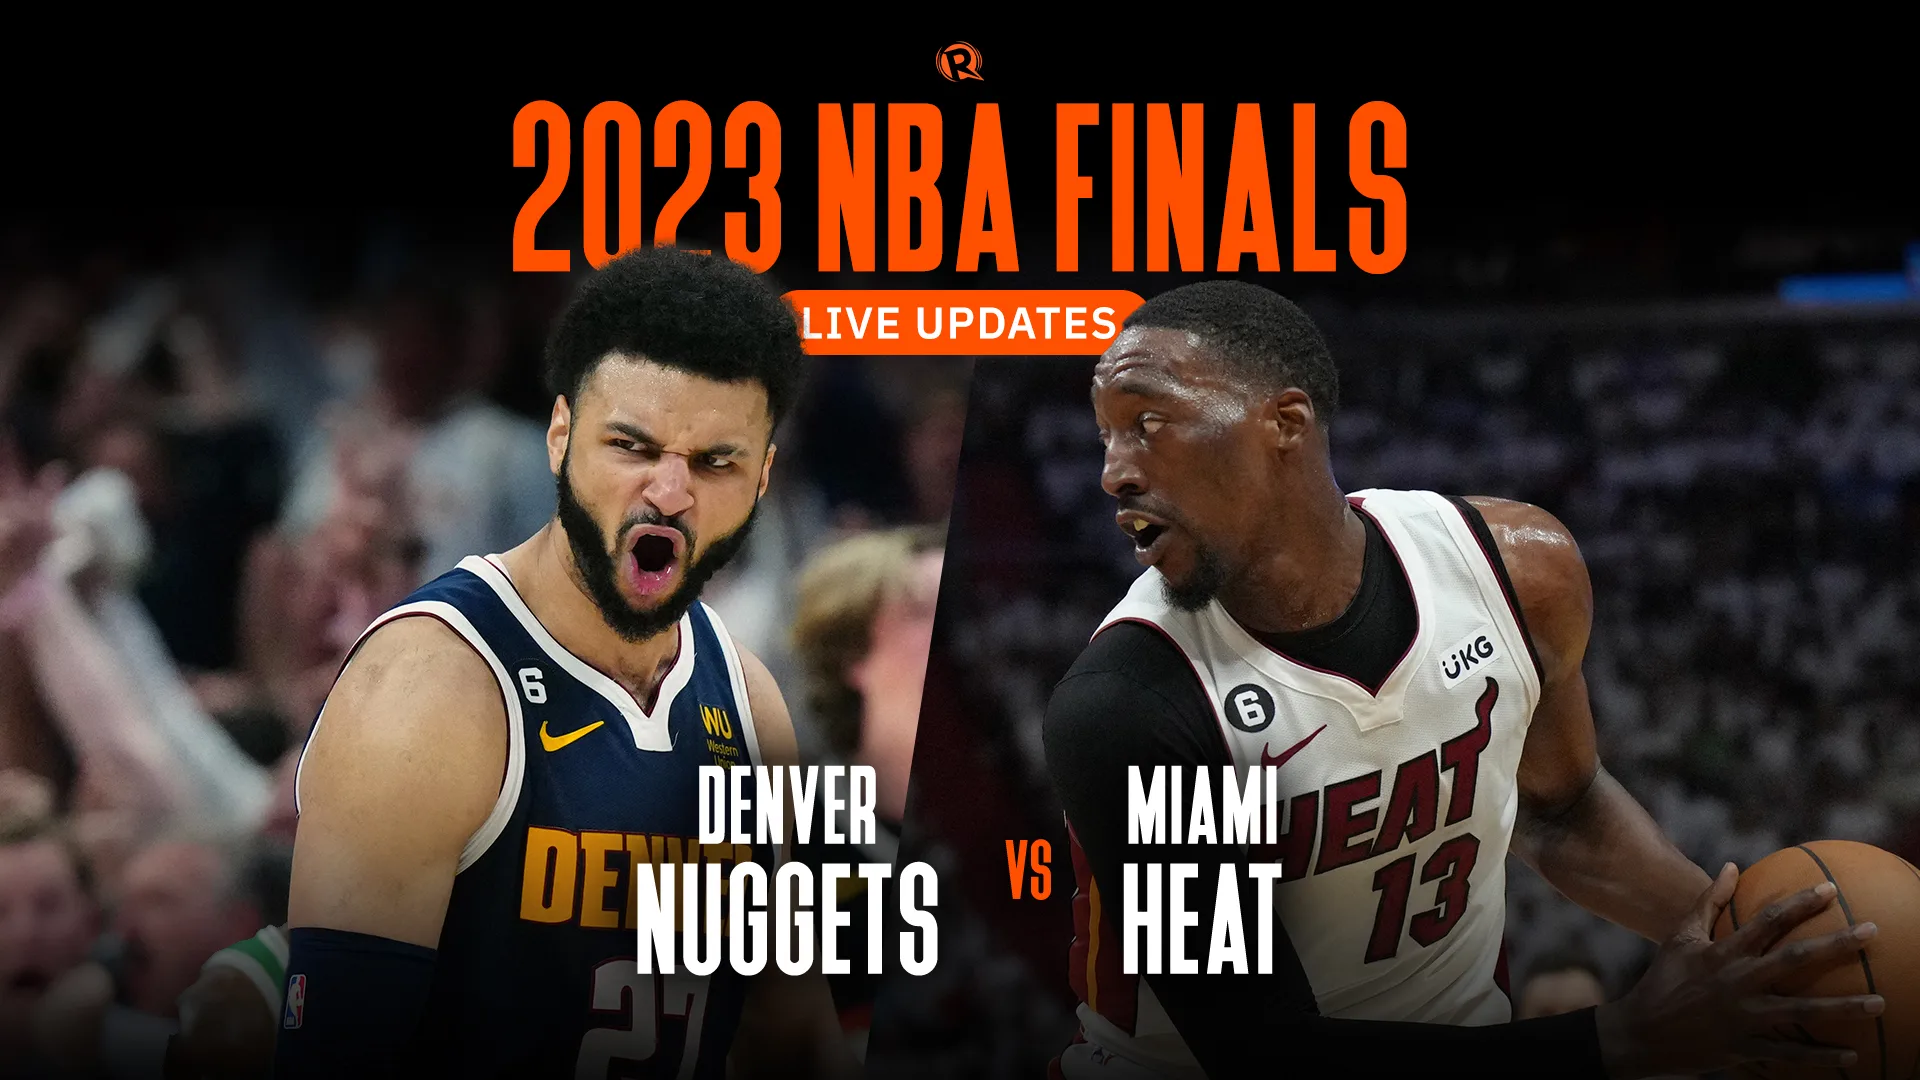 HERES Where to Watch Miami Heat vs Denver Nuggets (Free) Live Streaming on Reddit